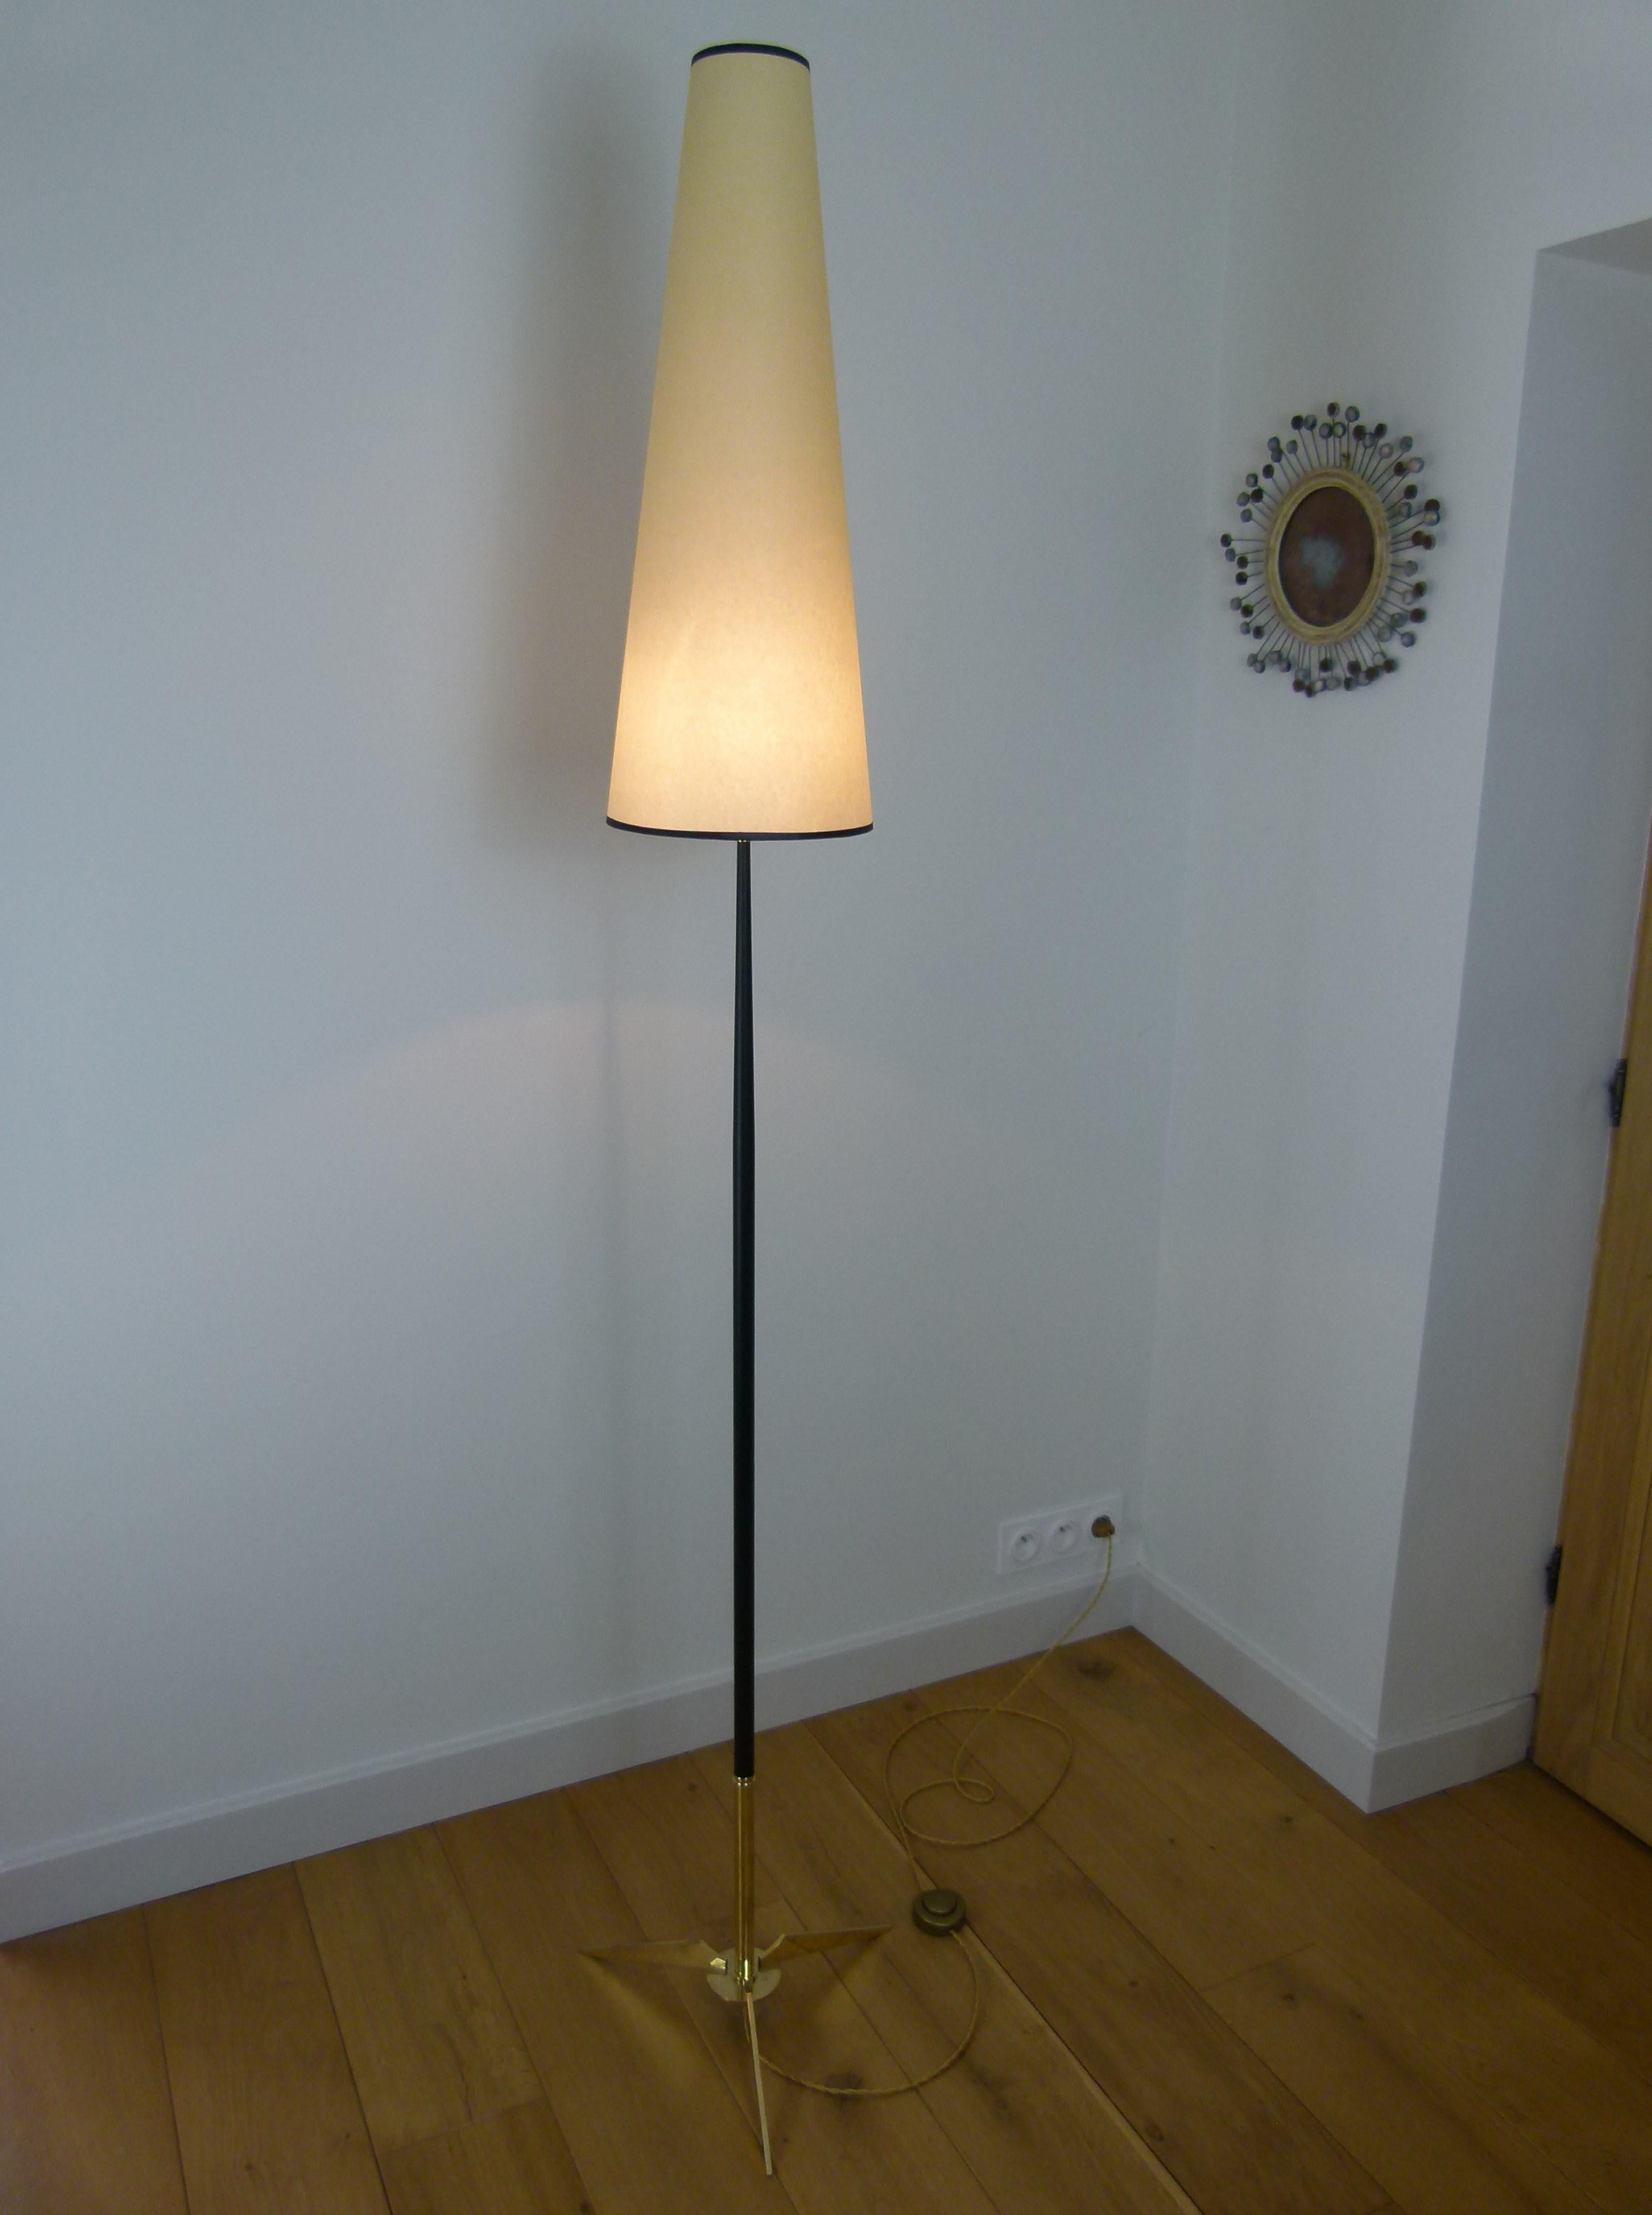 Floor lamp in black lacquered metal and solid brass, consisting of a tripod foot solid brass, topped with a conical black lacquered metal, ending with a brass ring, on which is placed a conical shade, diffusing the light.
This floor lamp has been